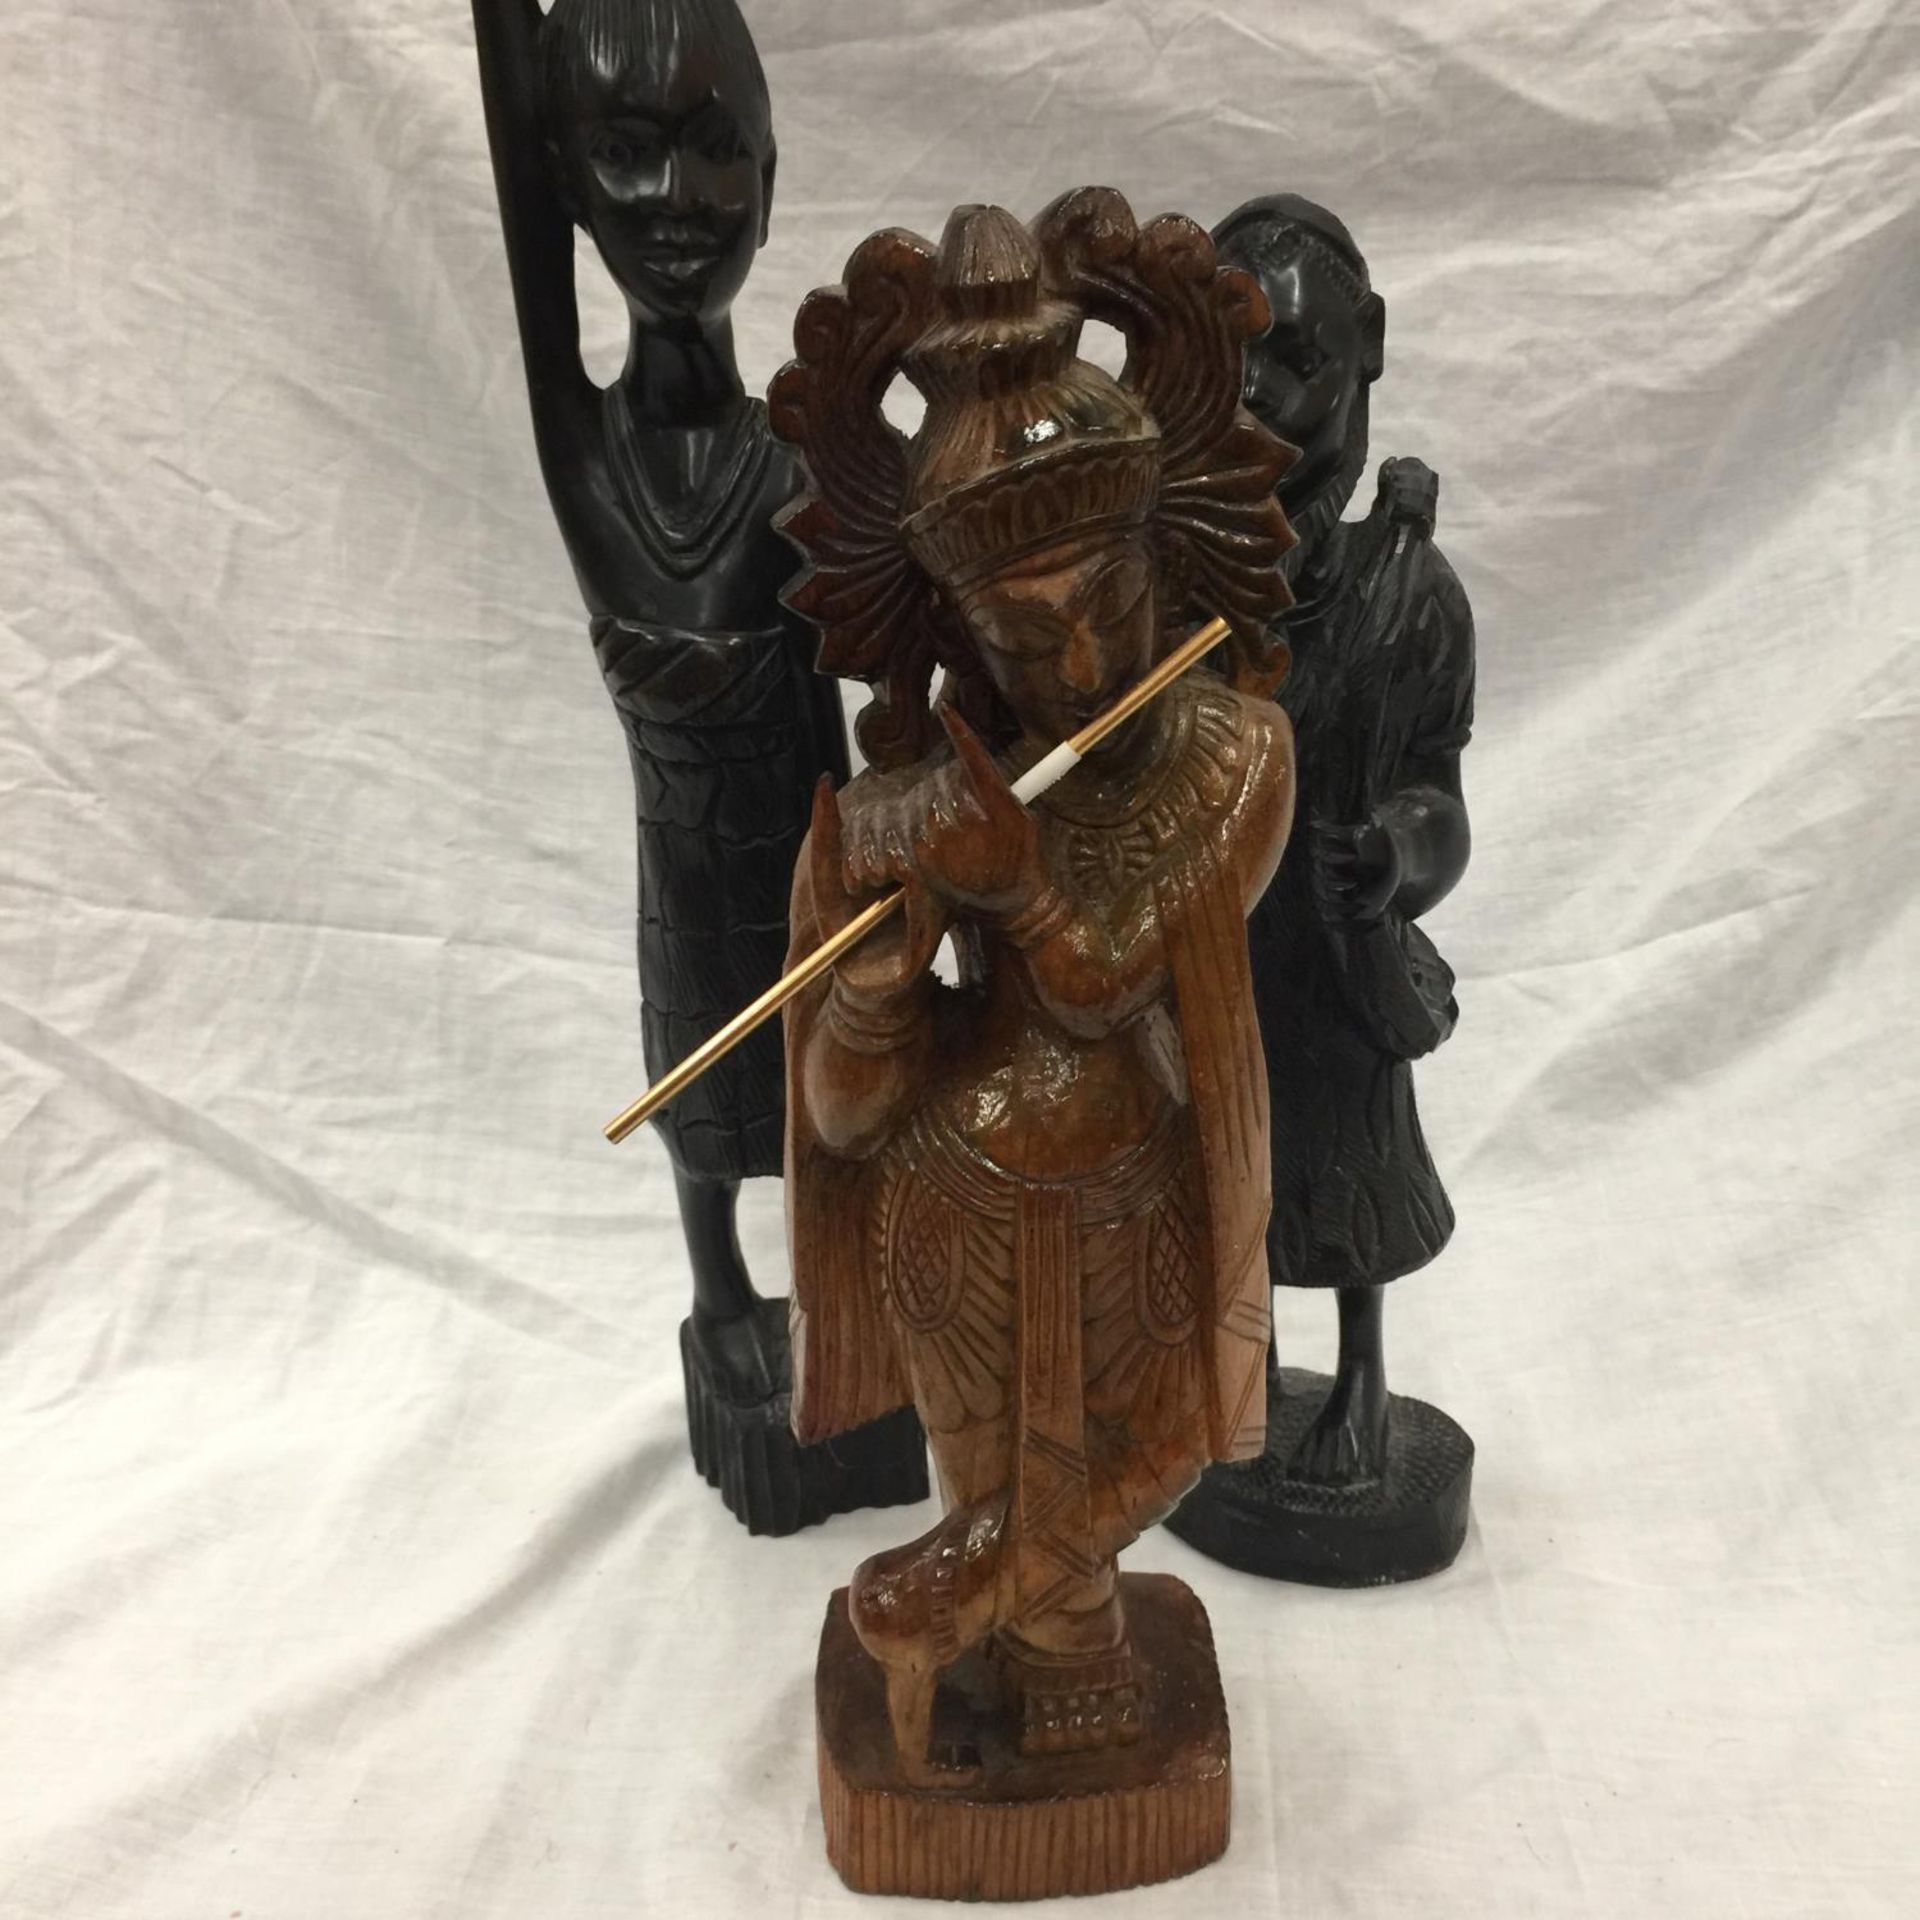 THREE CARVED WOODEN FIGURES - TWO AFRICAN HEIGHT 64CM AND 43CM AND AN ASIAN EXAMPLE HEIGHT 43CM